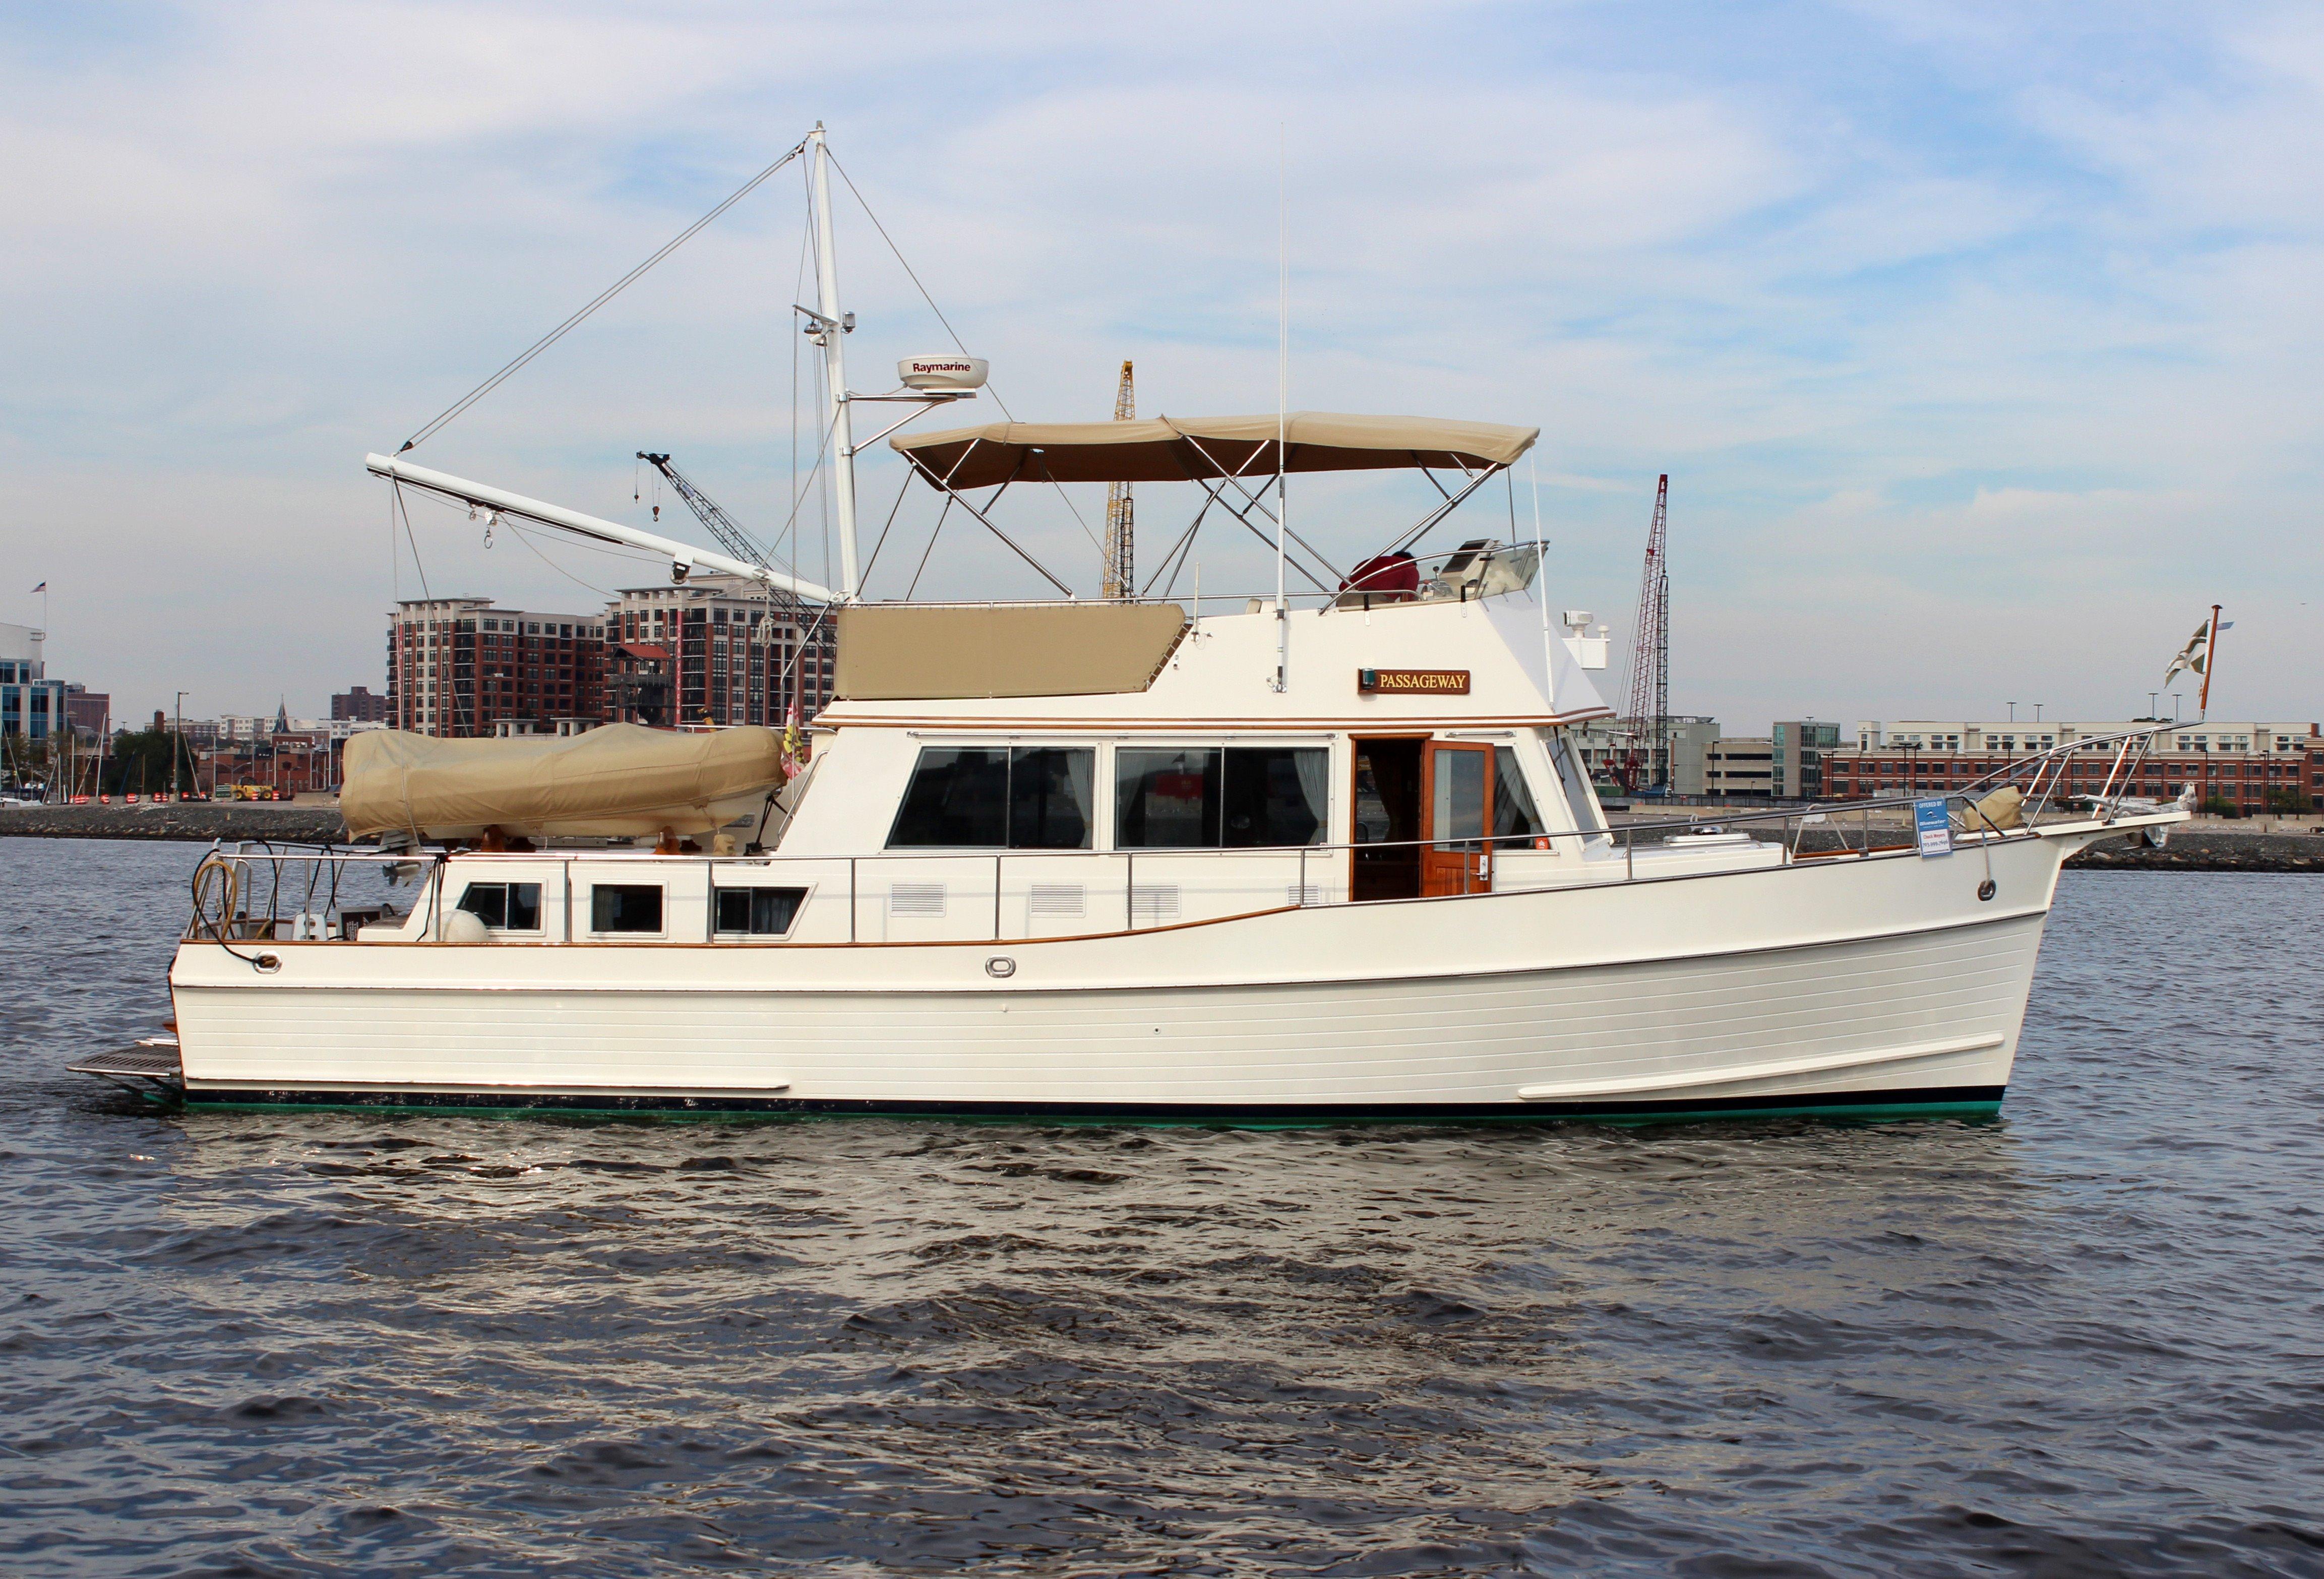 42 Foot Boats for Sale in MD | Boat listings